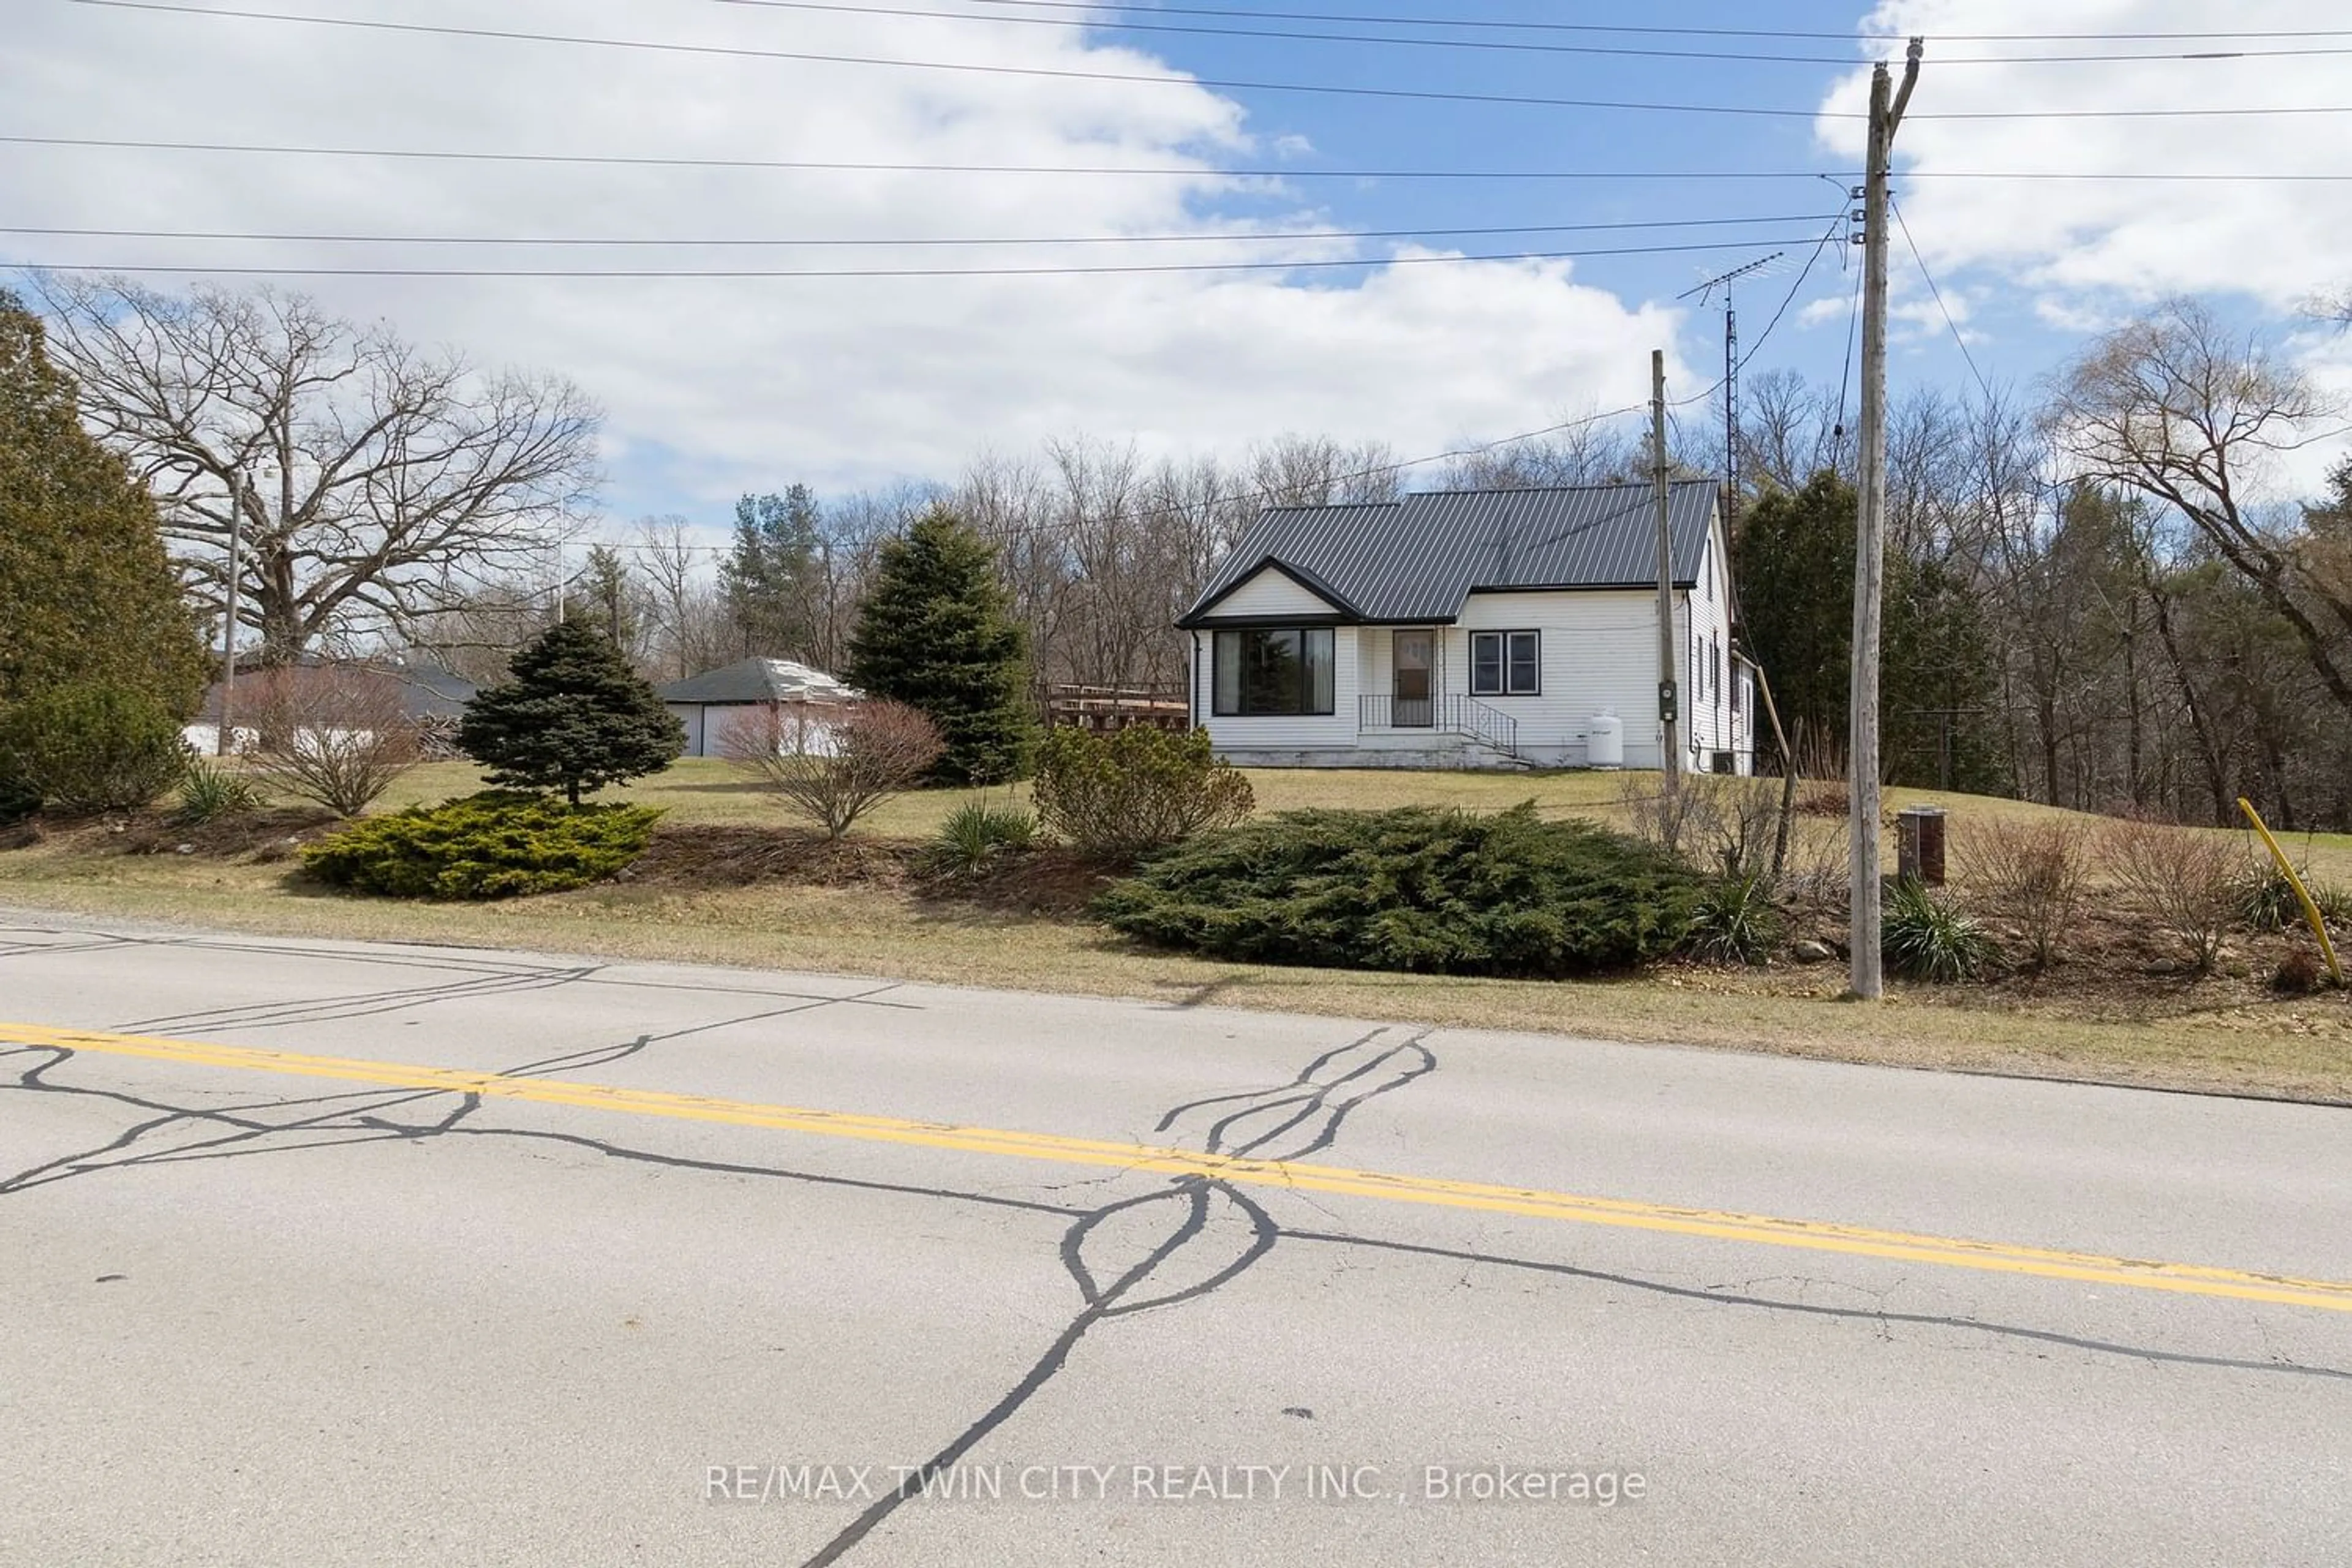 Street view for 882 Norfolk County 60 Rd, Norfolk Ontario N0E 1X0